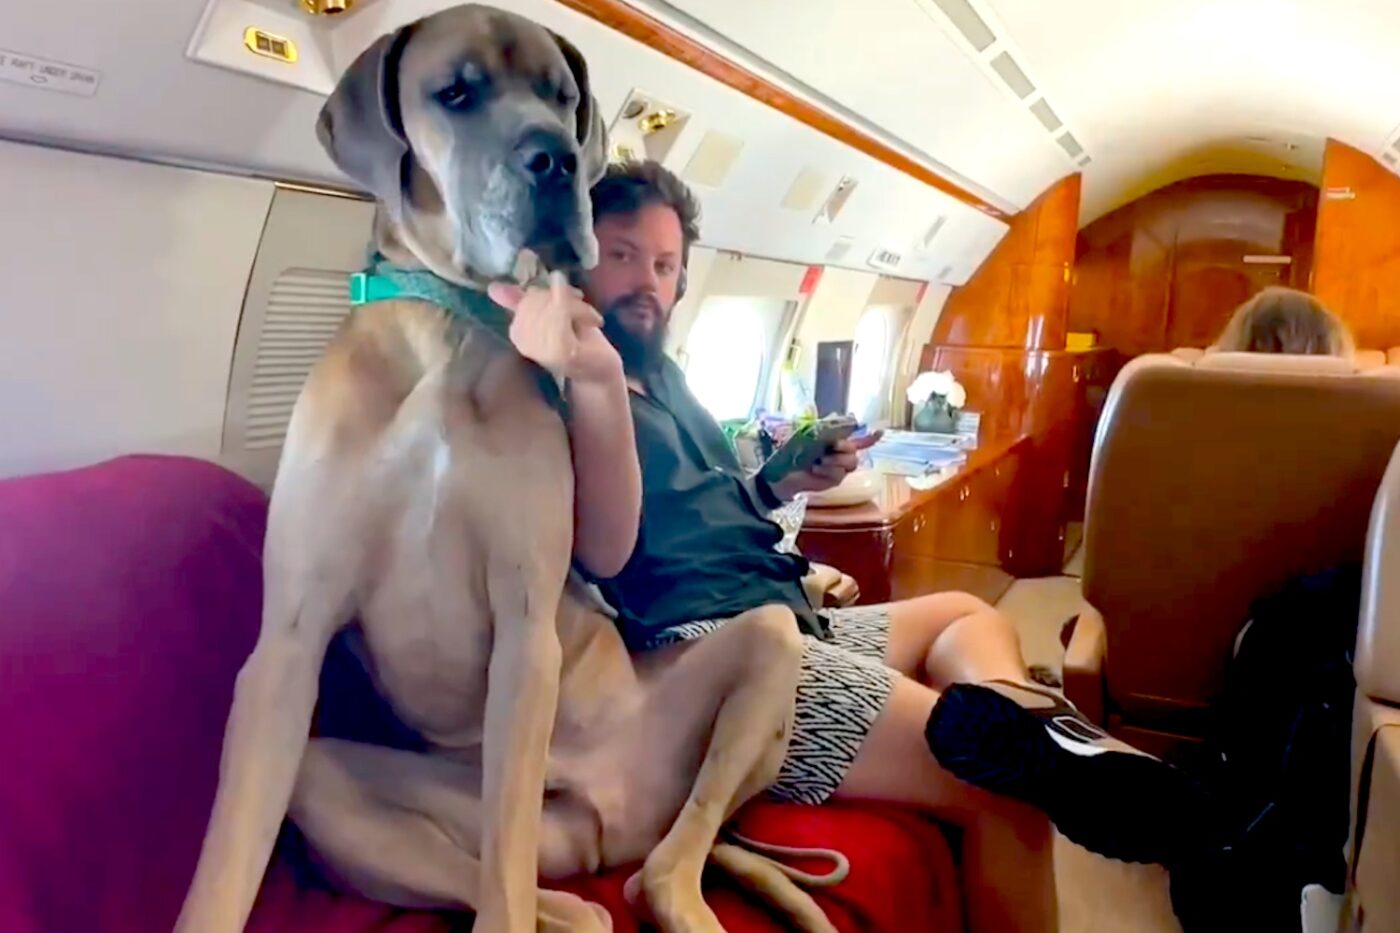 Private Jets For Dogs: For $30,000 Your Pets Can Fly Better Than You